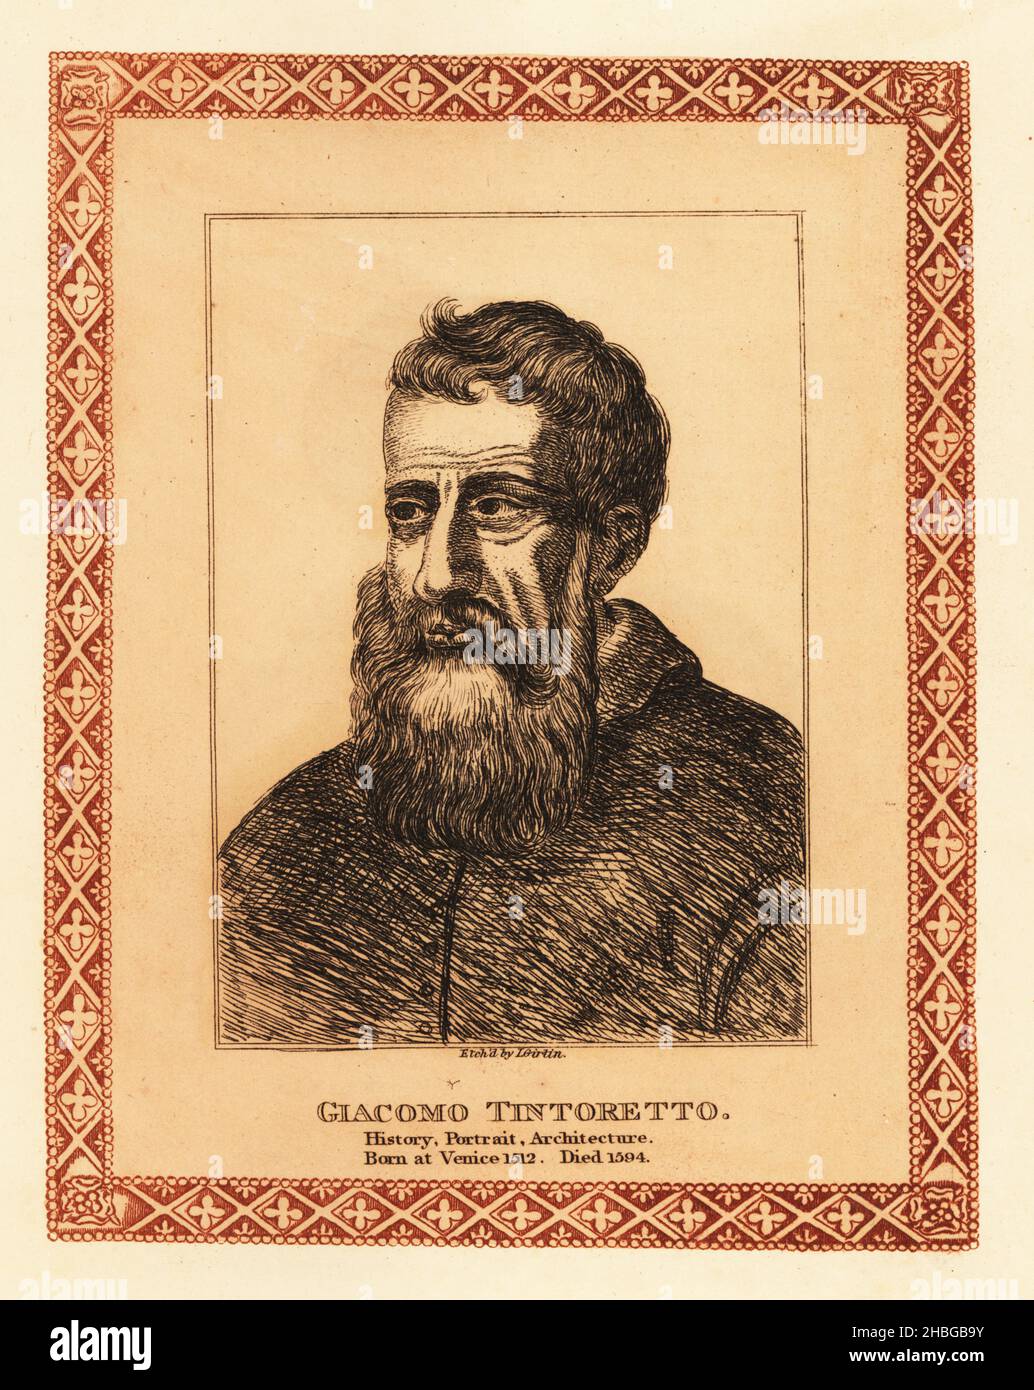 Tintoretto, 1518-1594, Italian painter identified with the Venetian school and Mannerist style. Jacopo Robusti, Giacomo Tintoretto, history, portrait, architecture. Tinted etching within a decorative border by John Girtin from John Girtin’s Seventy-Five Portraits of Celebrated Painters from Authentic Originals, J. M’Creery, London, 1817. Stock Photo